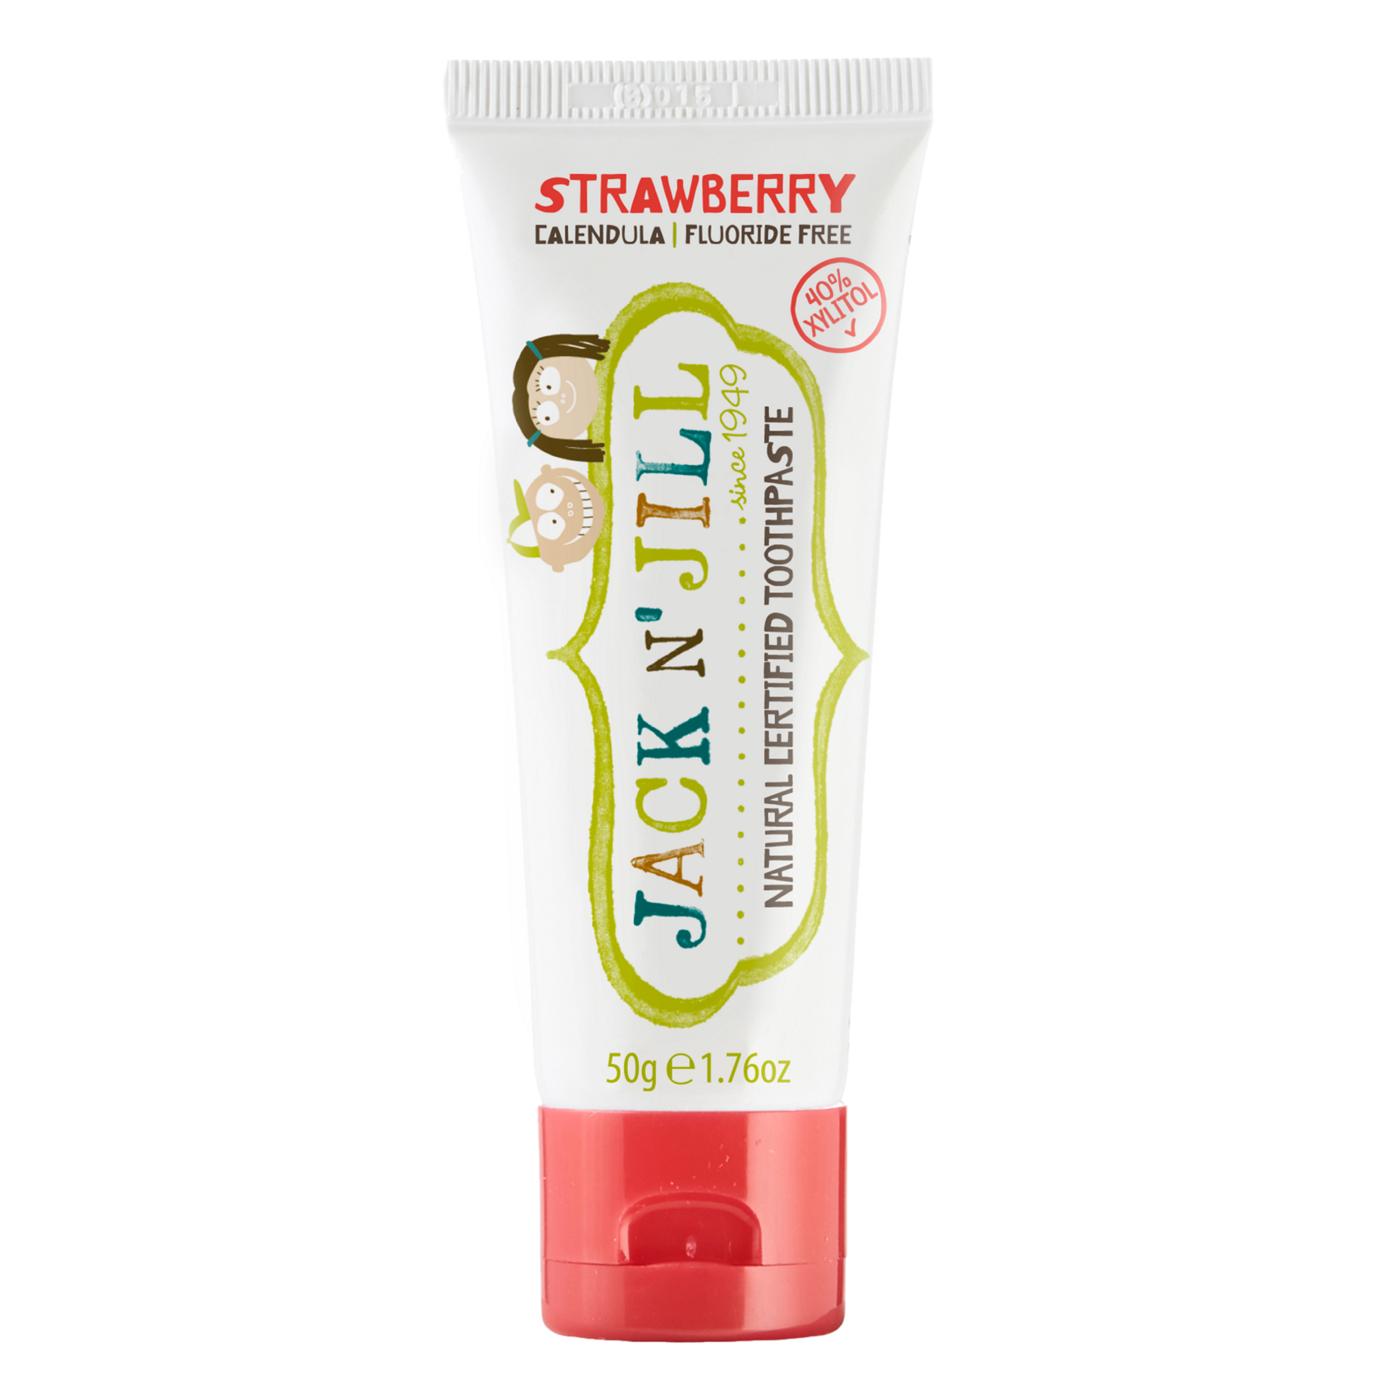 Jack N' Jill Natural Certified Toothpaste - Strawberry; image 1 of 2